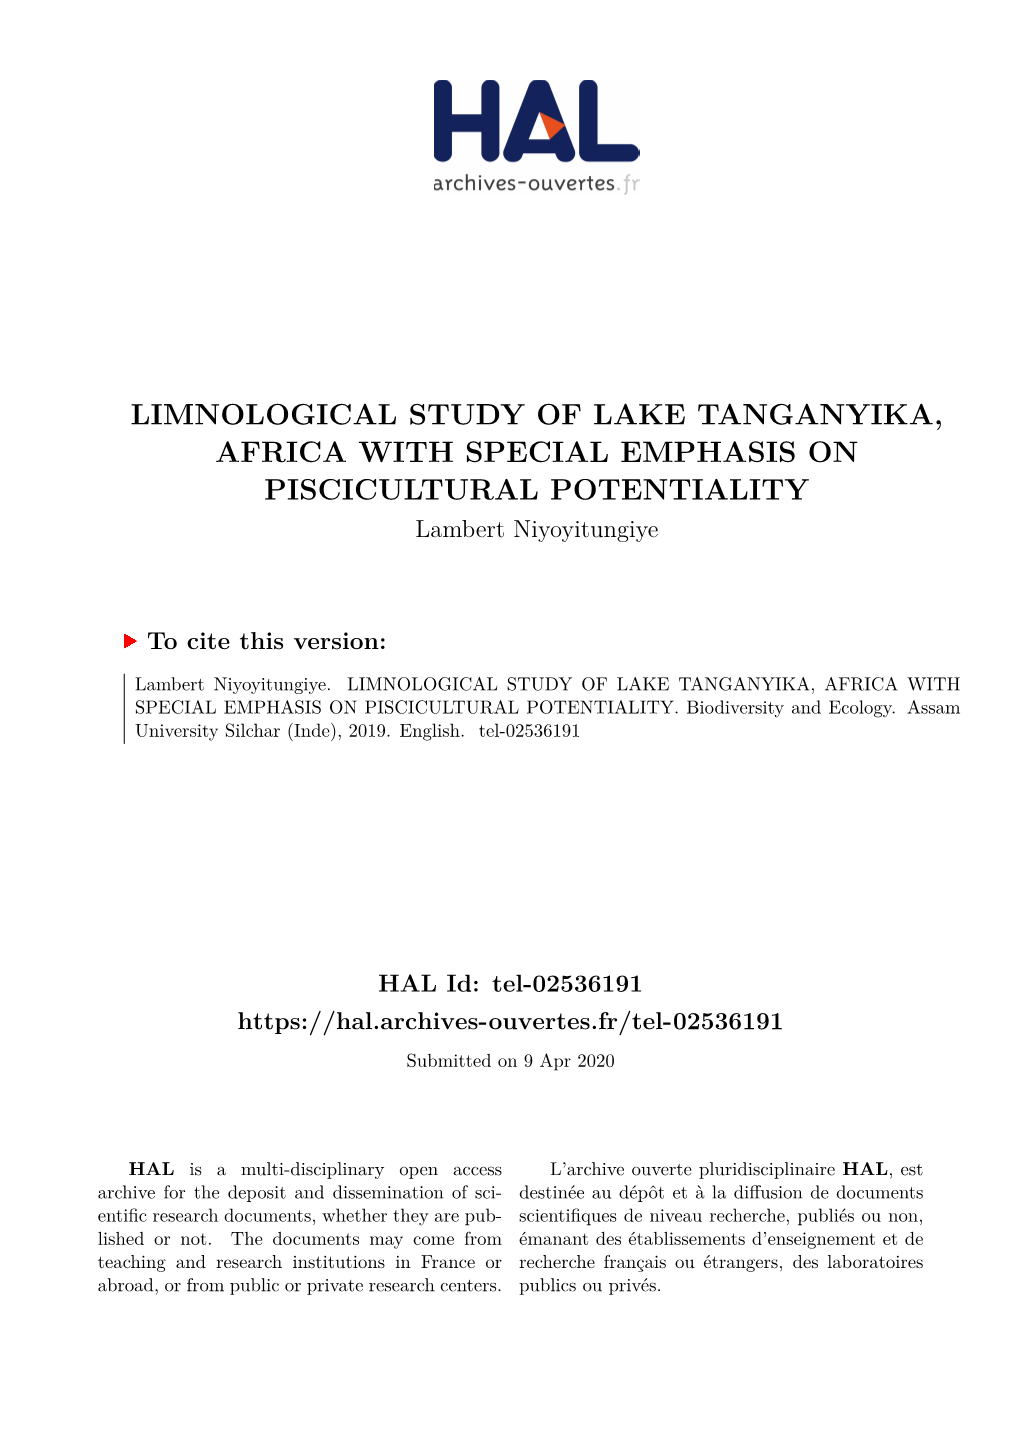 LIMNOLOGICAL STUDY of LAKE TANGANYIKA, AFRICA with SPECIAL EMPHASIS on PISCICULTURAL POTENTIALITY Lambert Niyoyitungiye